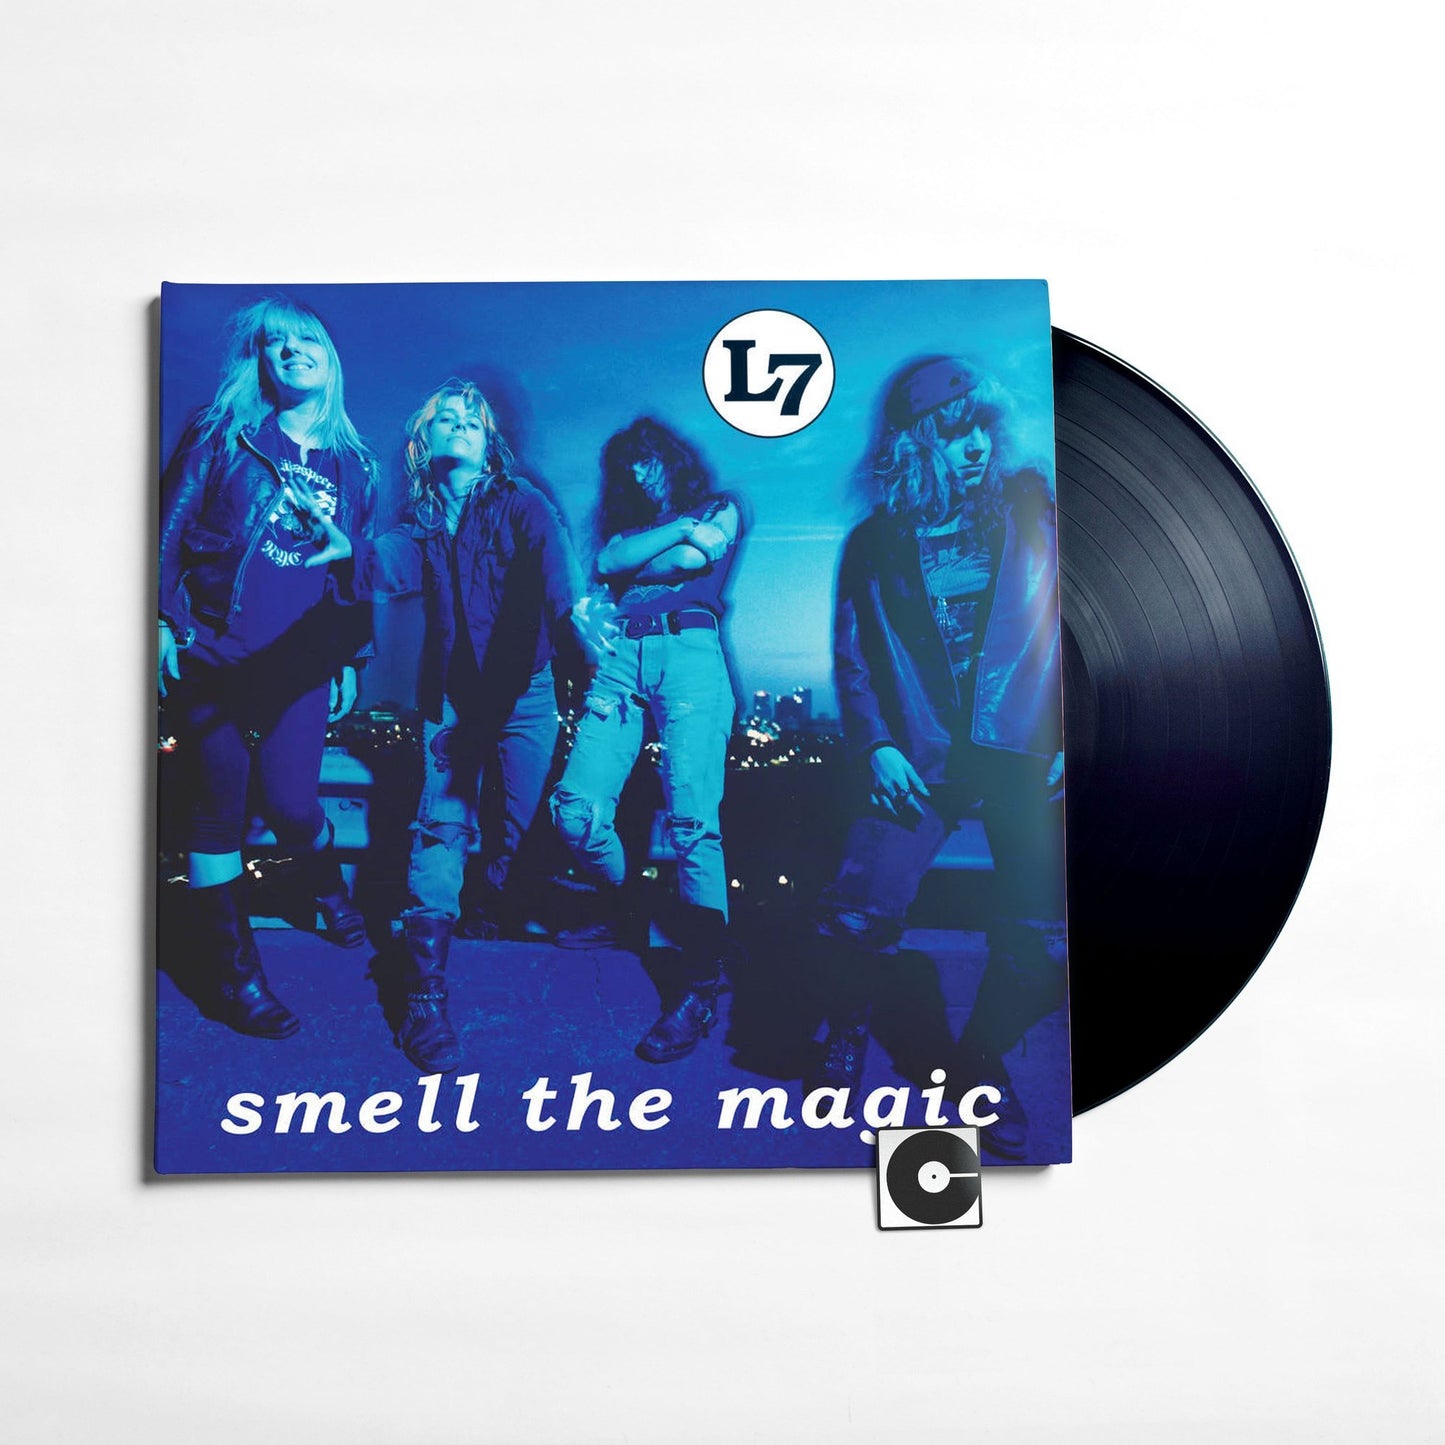 L7 - "Smell The Magic"